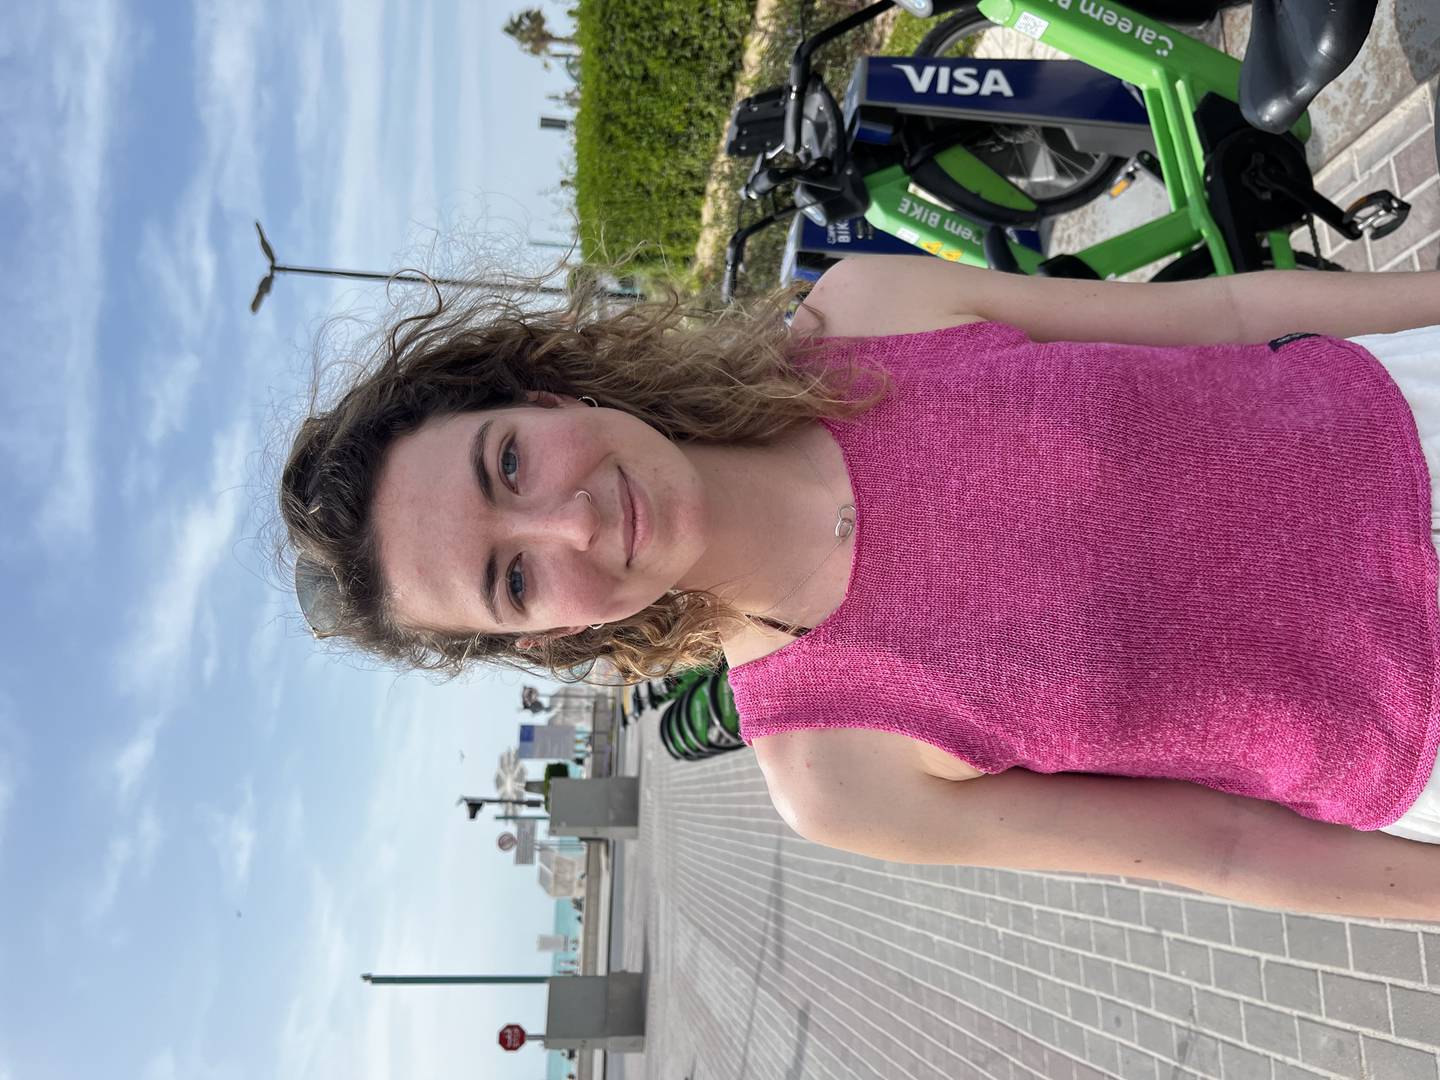 Eliza Robertson believes the introduction of regulations for e-scooters will improve safety.